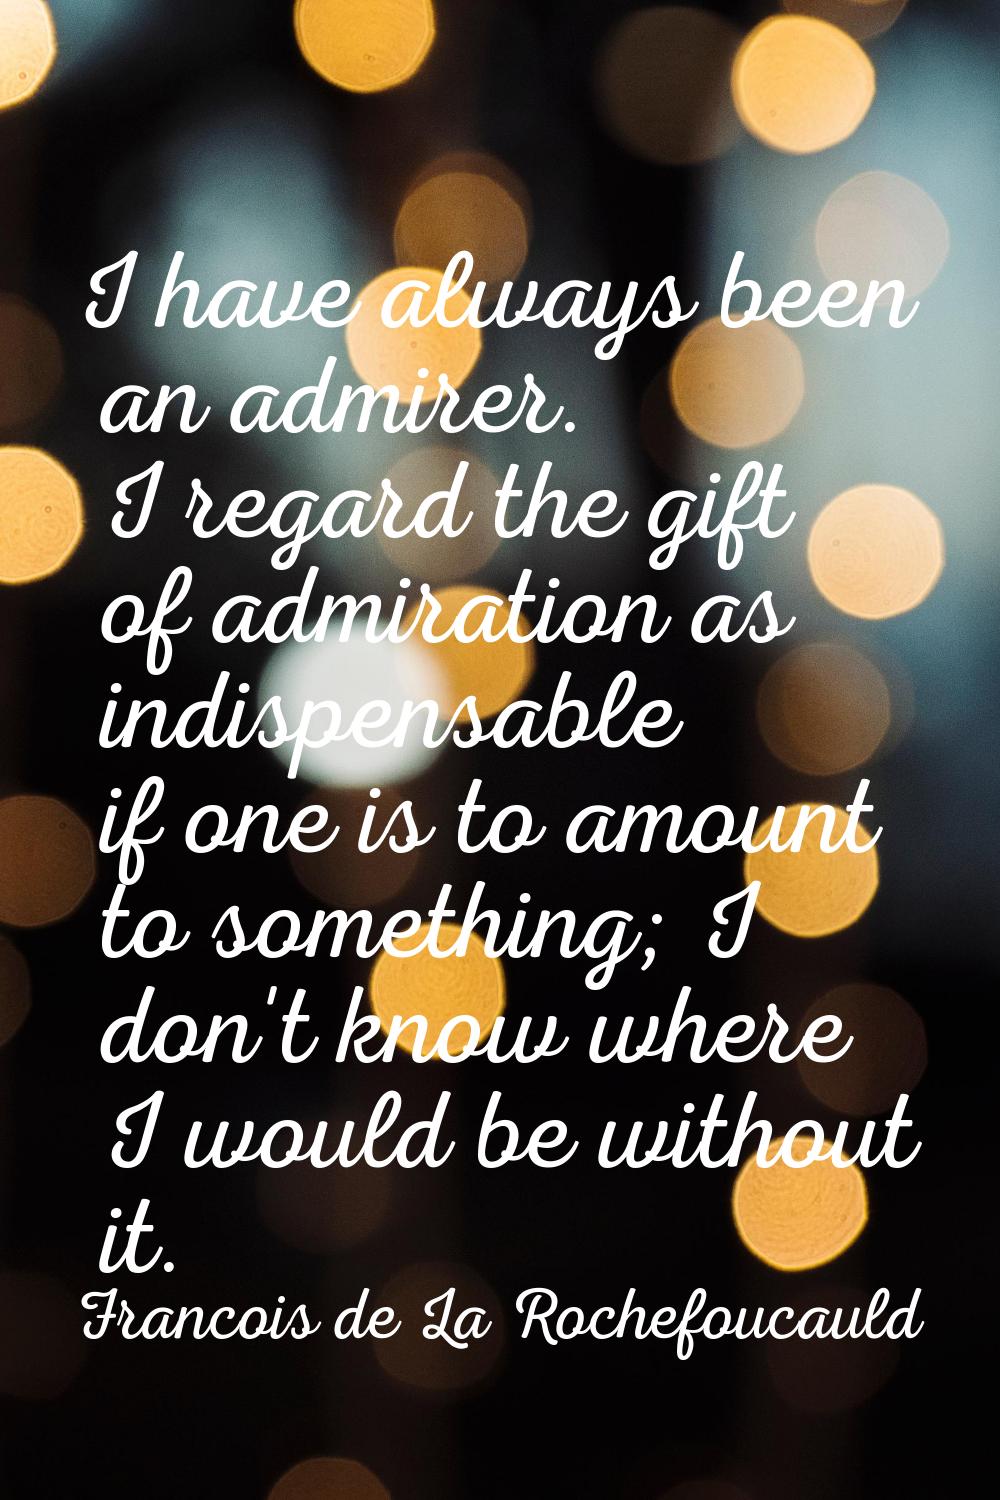 I have always been an admirer. I regard the gift of admiration as indispensable if one is to amount